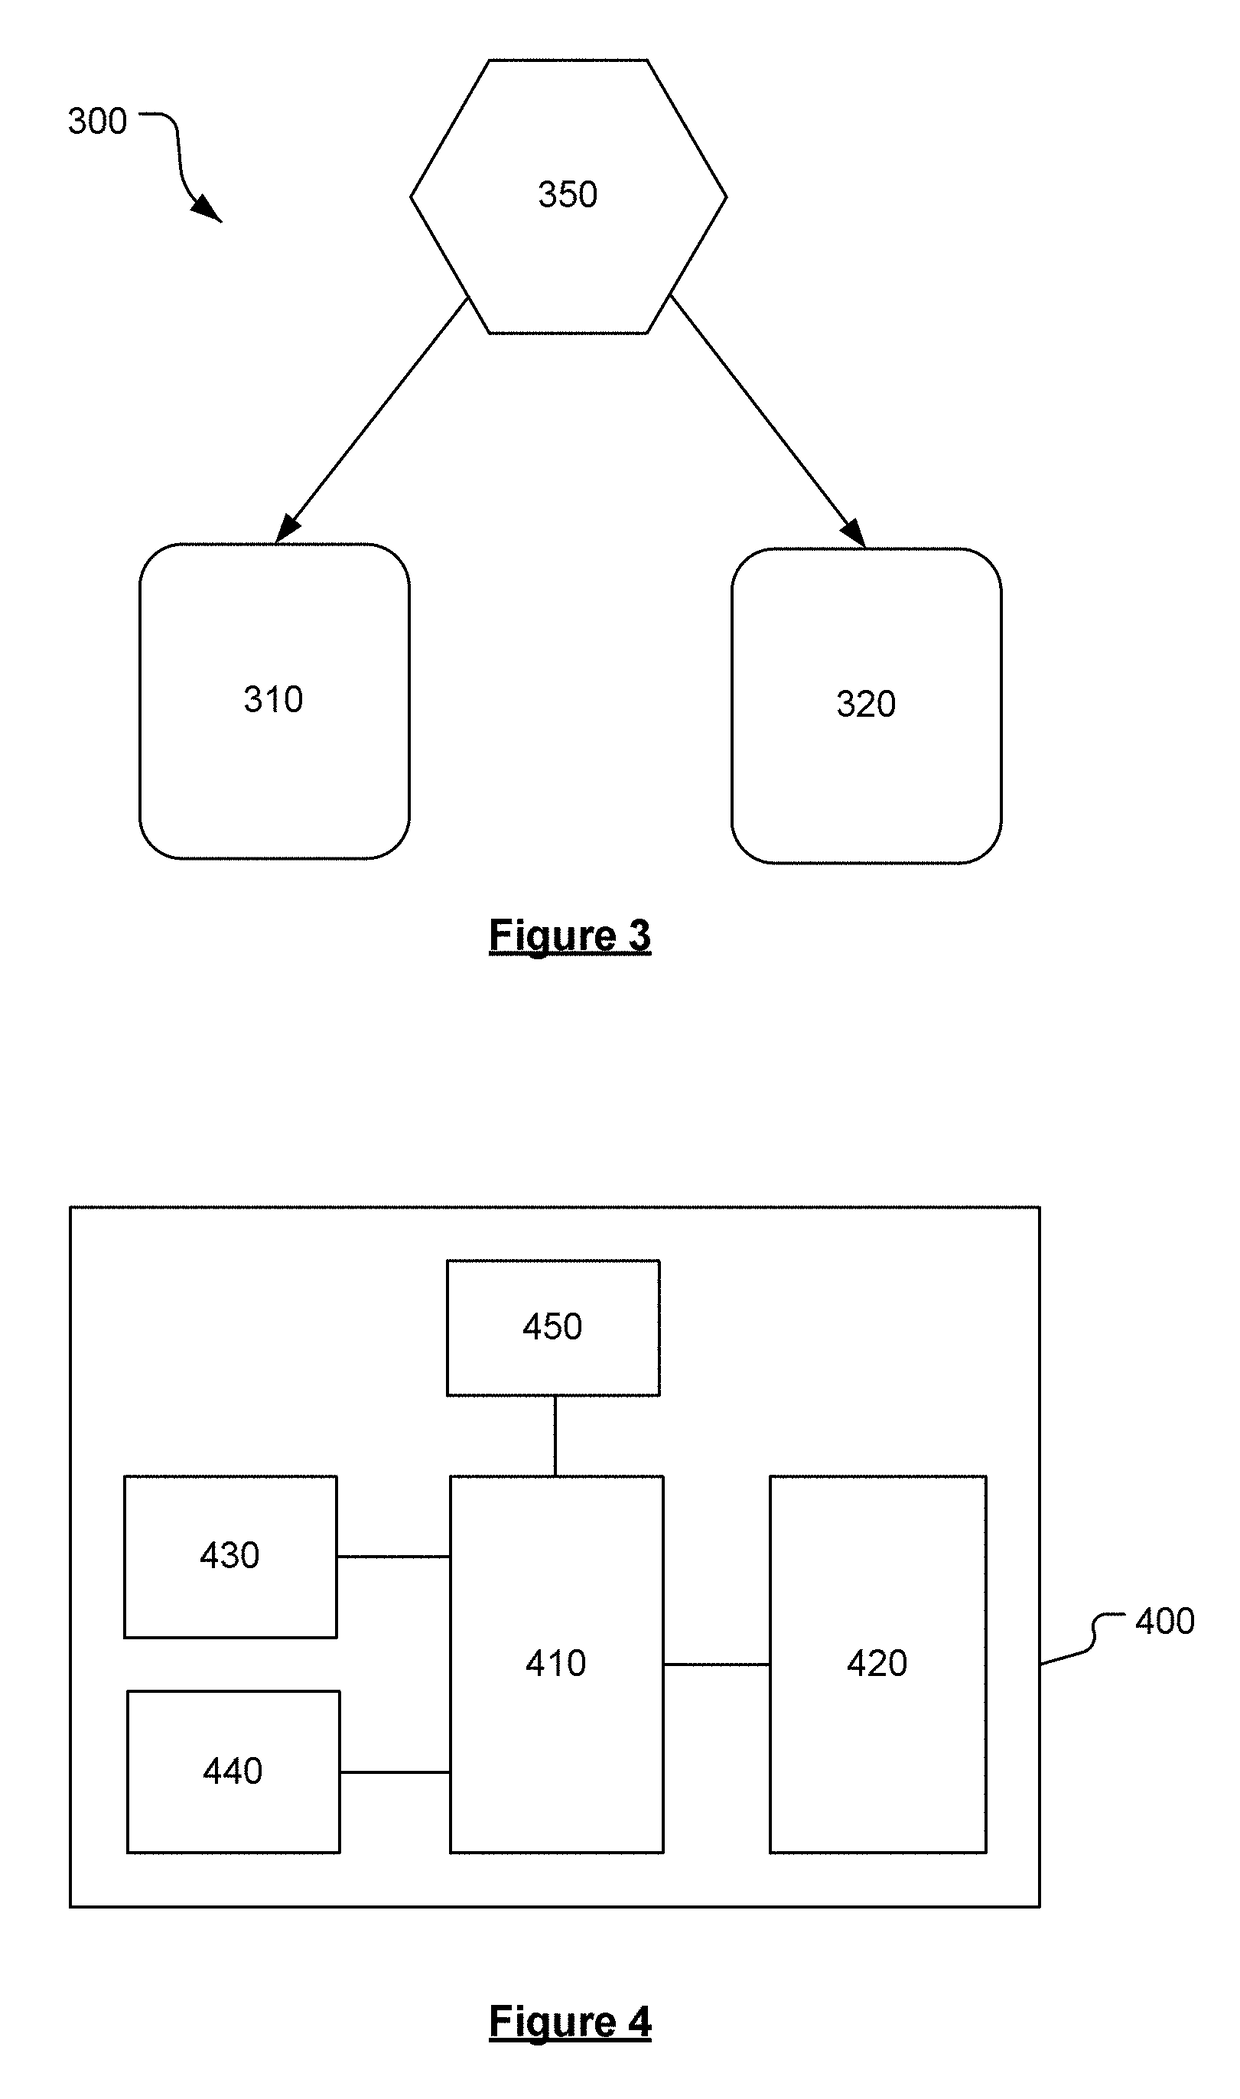 Method of sharing data between electronic devices